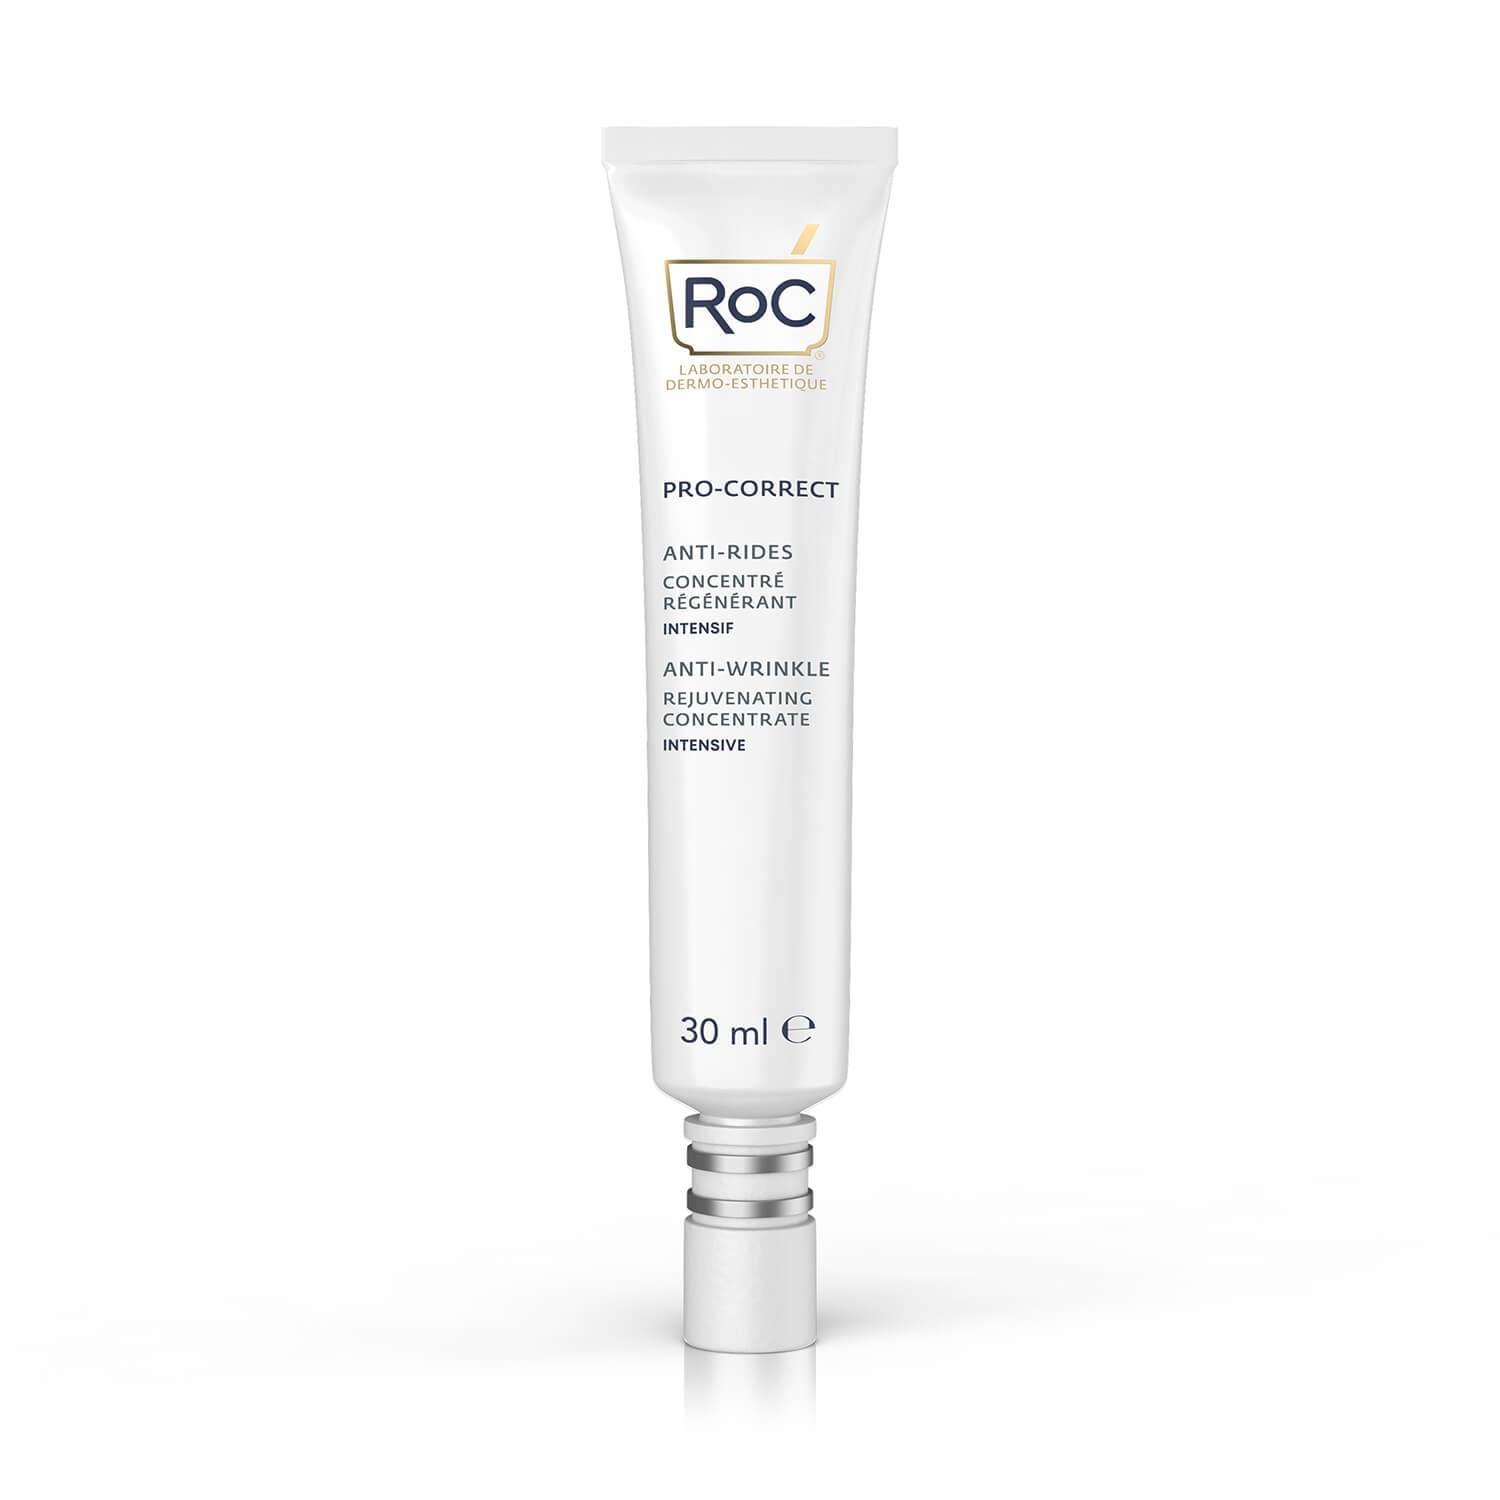 Pro-Correct Anti-Wrinkle Rejuvenating Concentrate Intensive